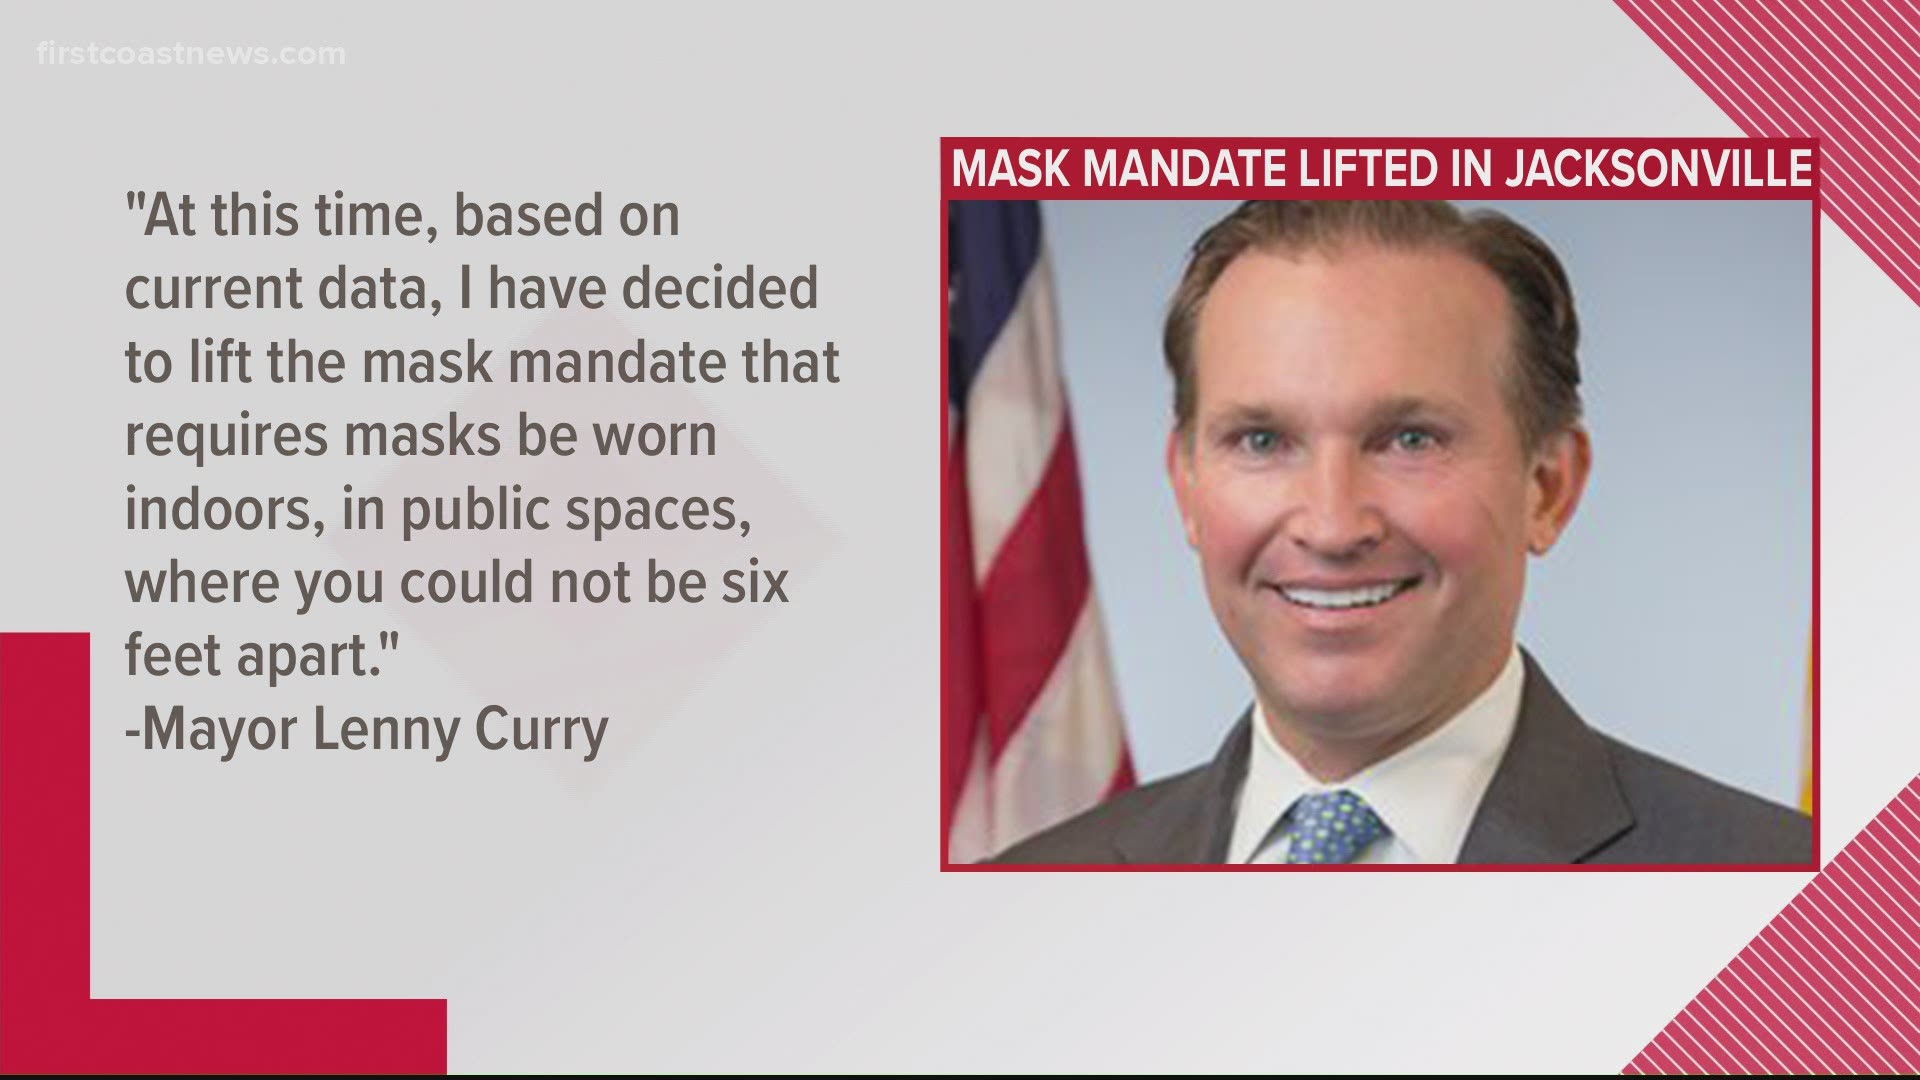 Jacksonville Mayor Lenny Curry released a statement Friday saying he's lifting the city's mask mandate which has been in place for about 270 days.